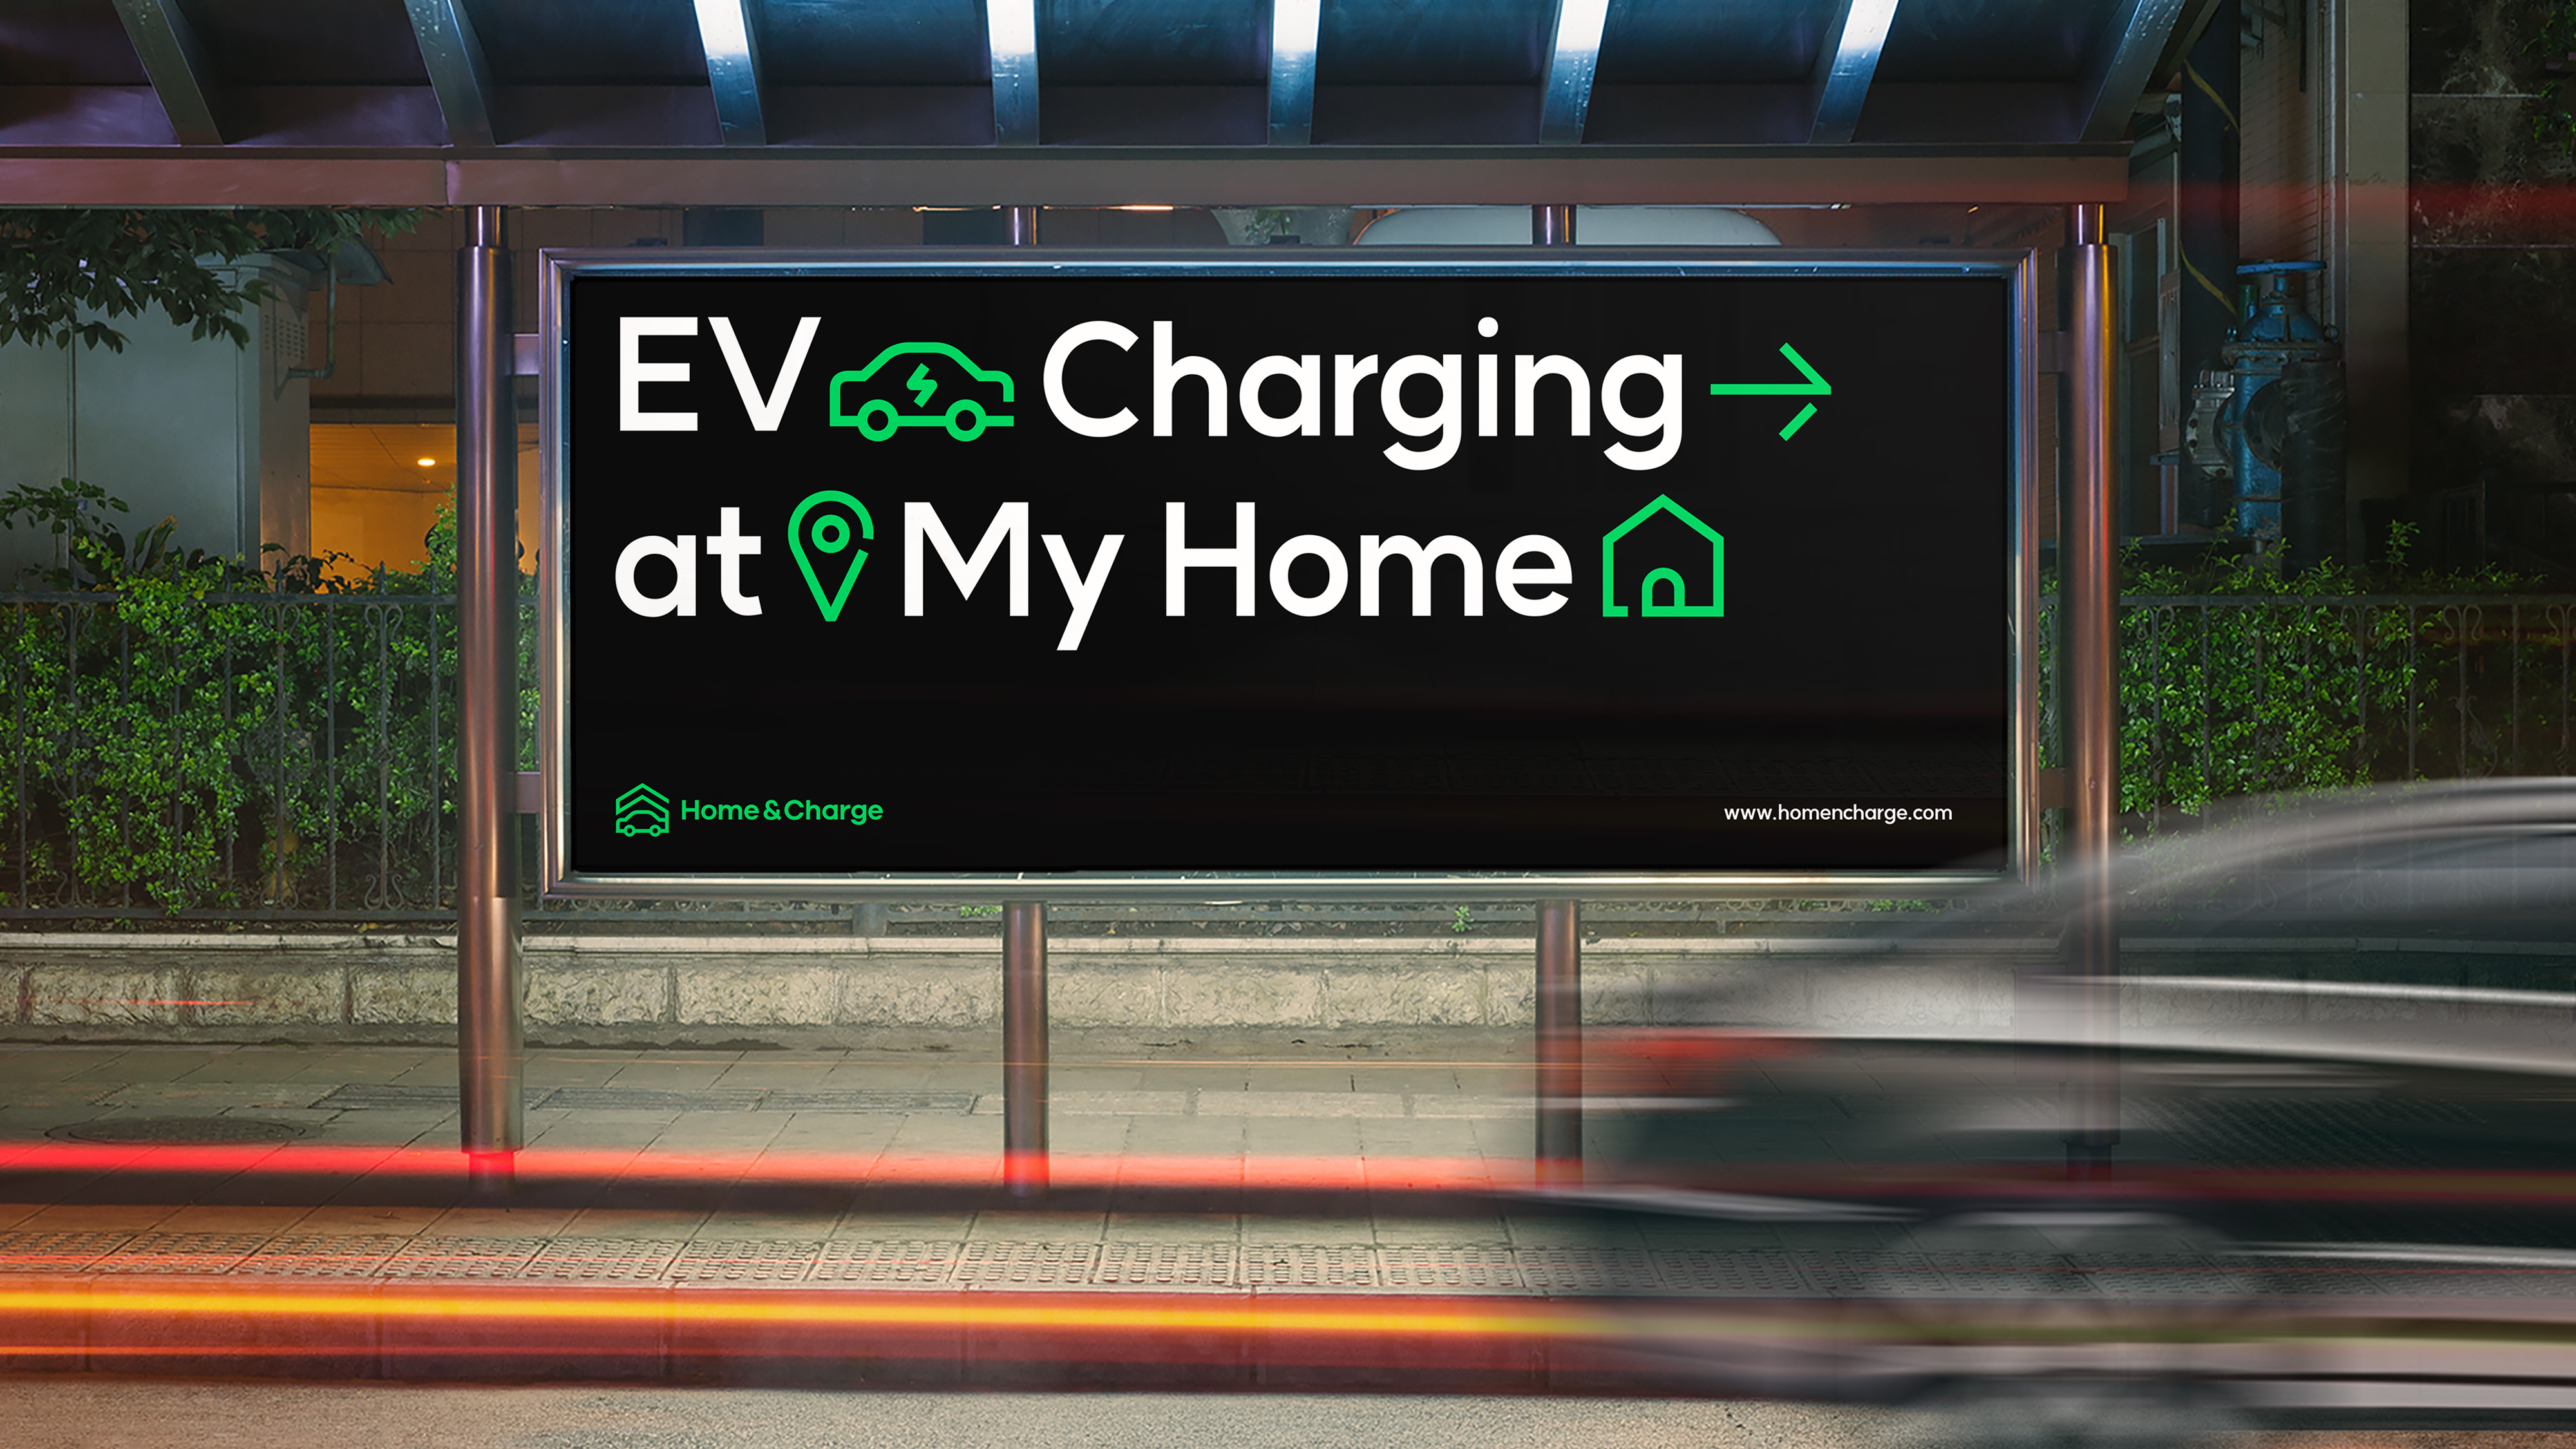 Home&Charge